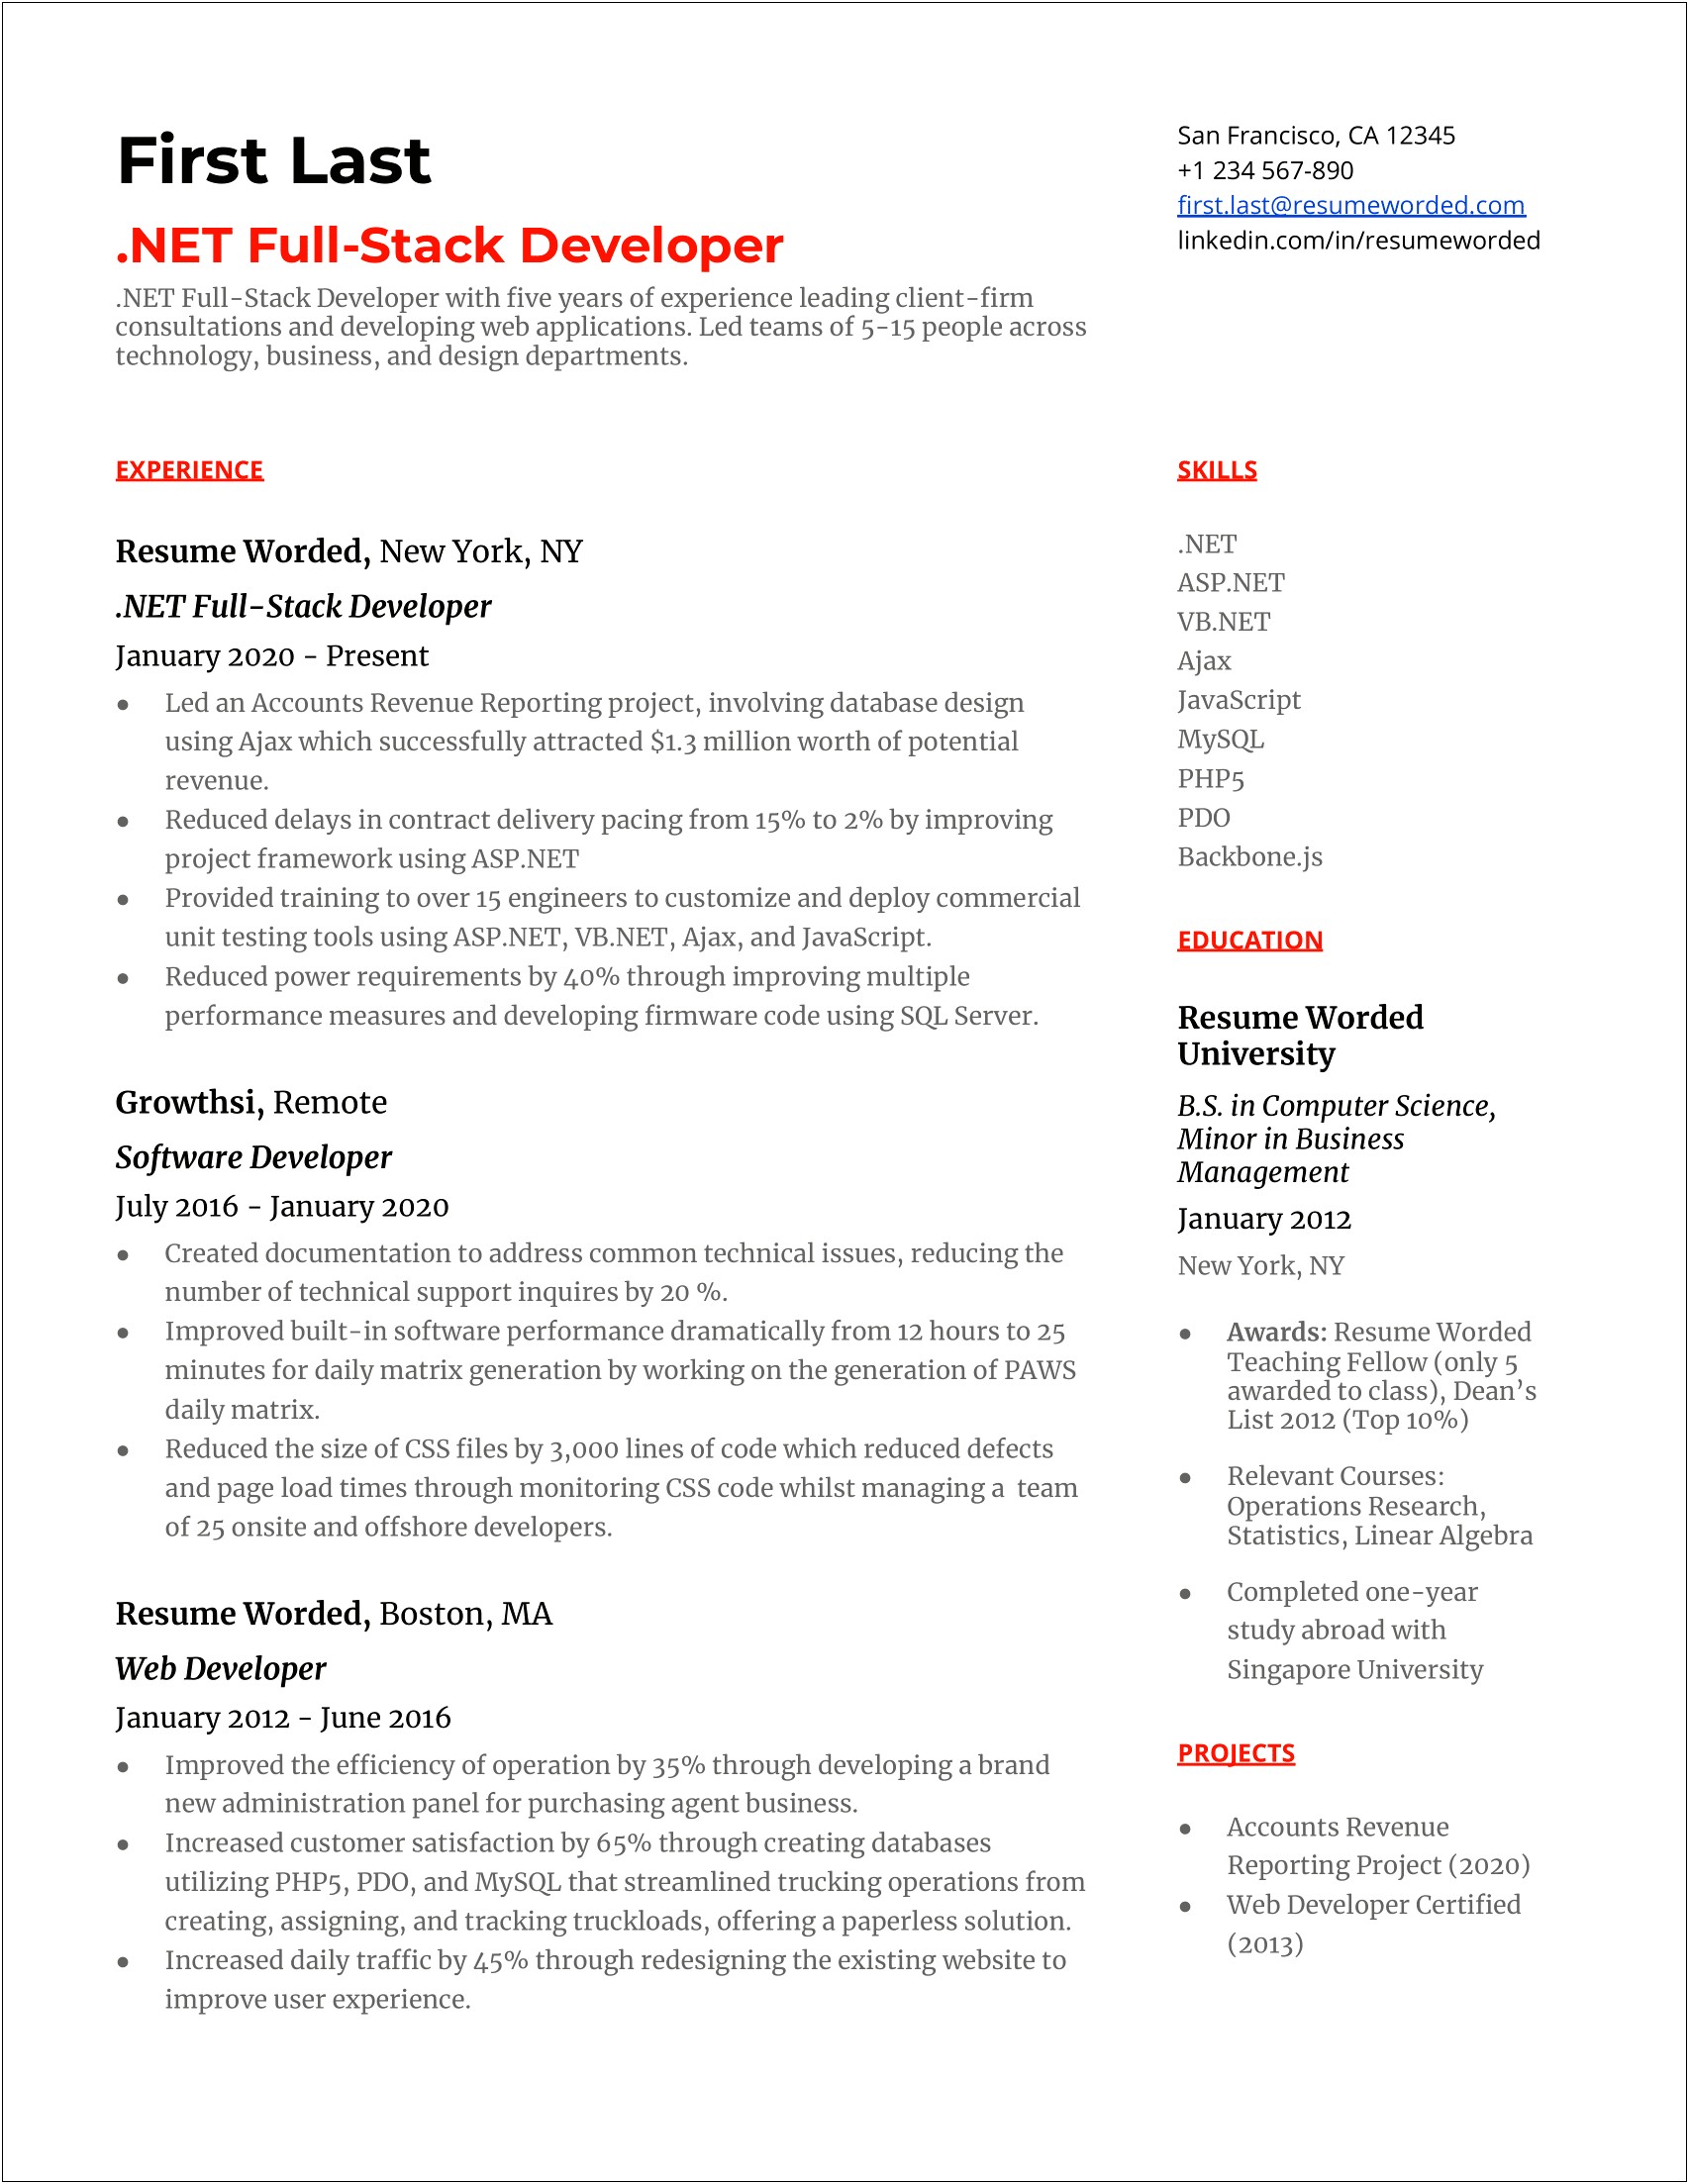 Python Developer Resume Samples For 2 Years Experience